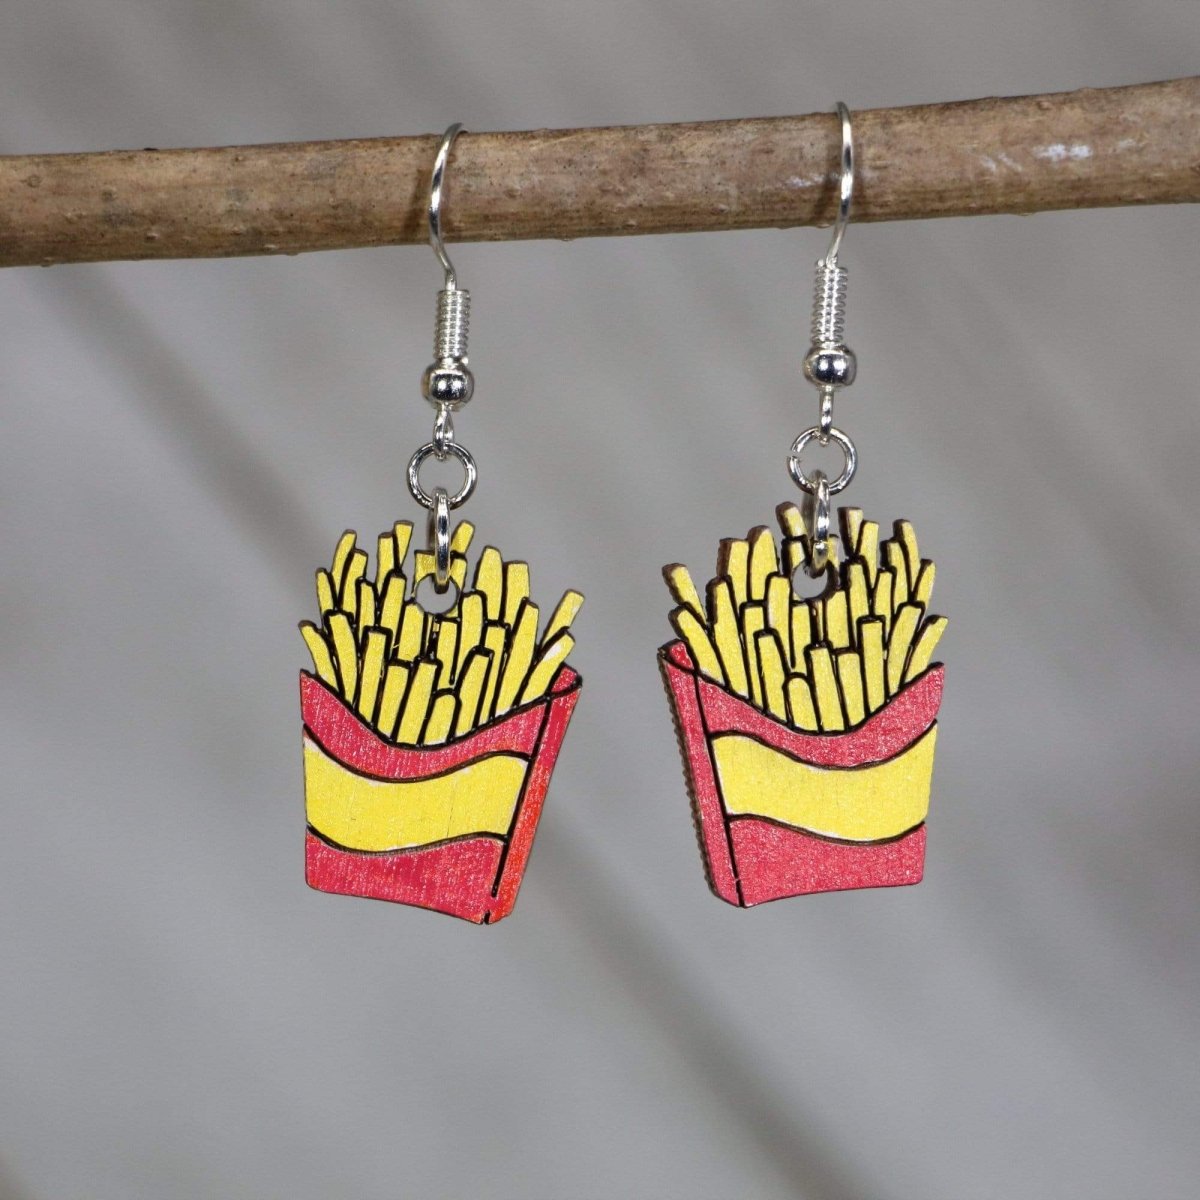 French Fry Wooden Dangle Earrings - Red and Yellow - Cate's Concepts, LLC